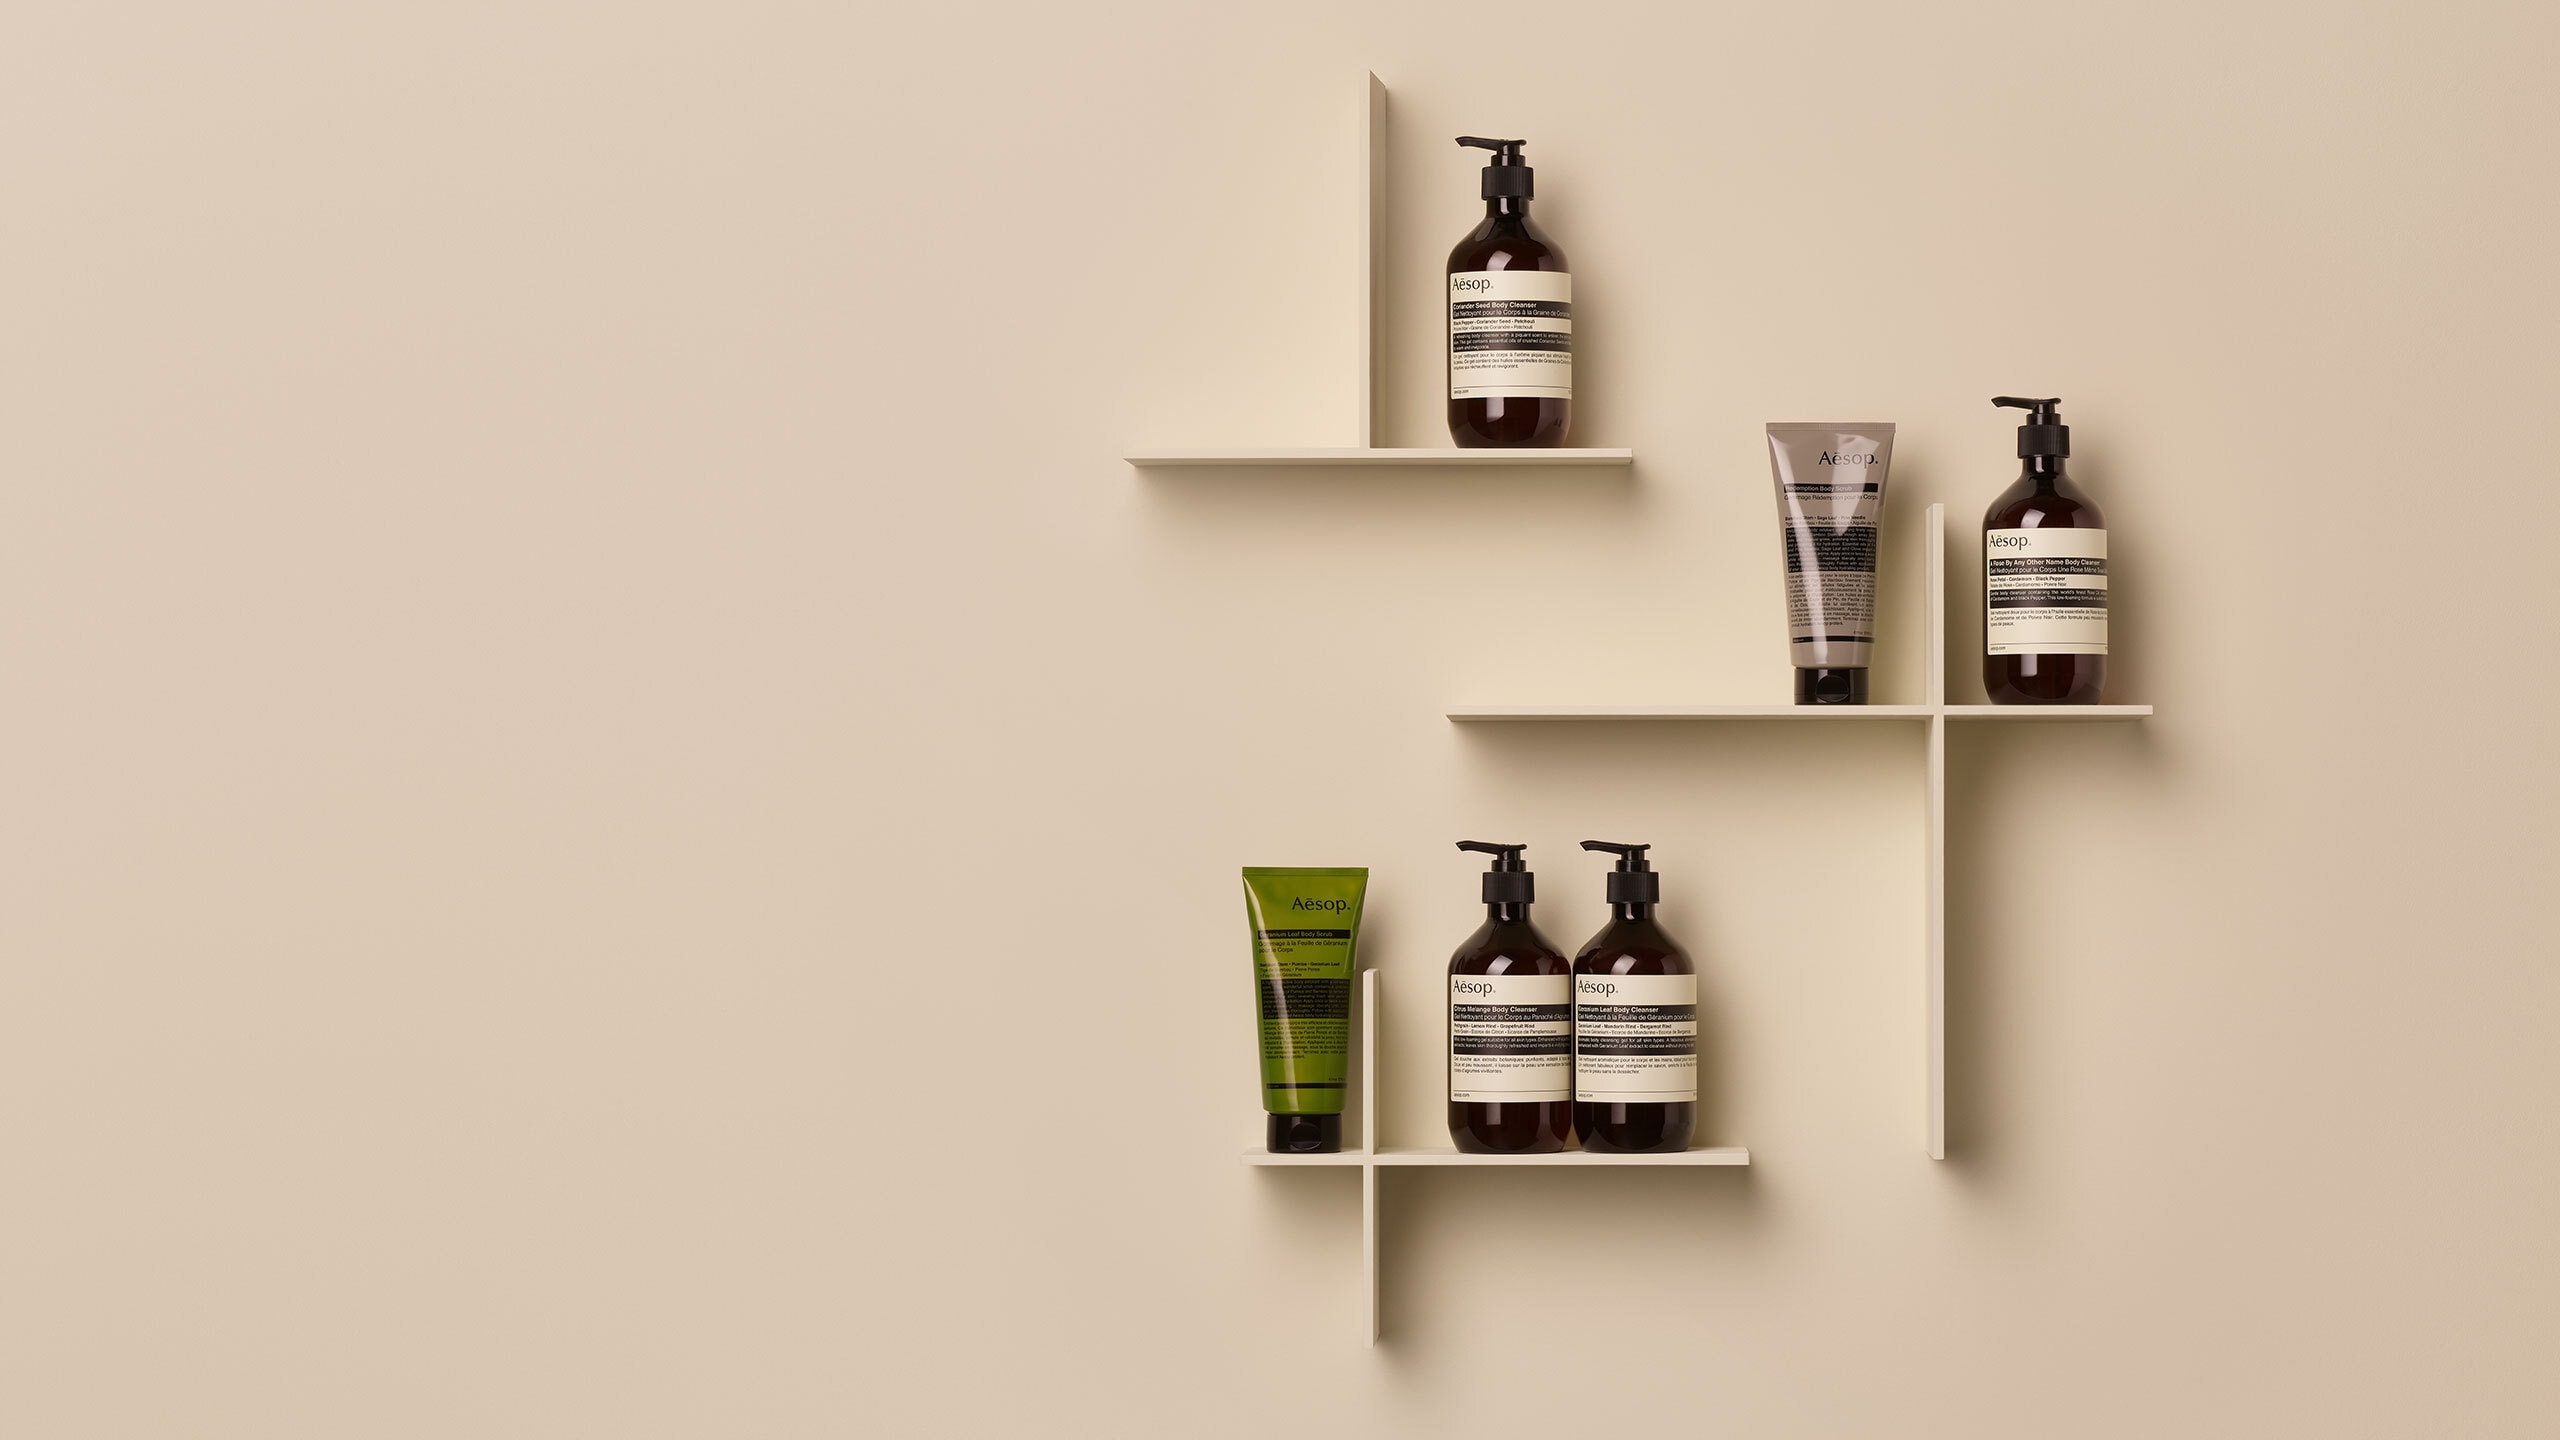 Aesop body cleansers in brown bottles with a yellow and orange background